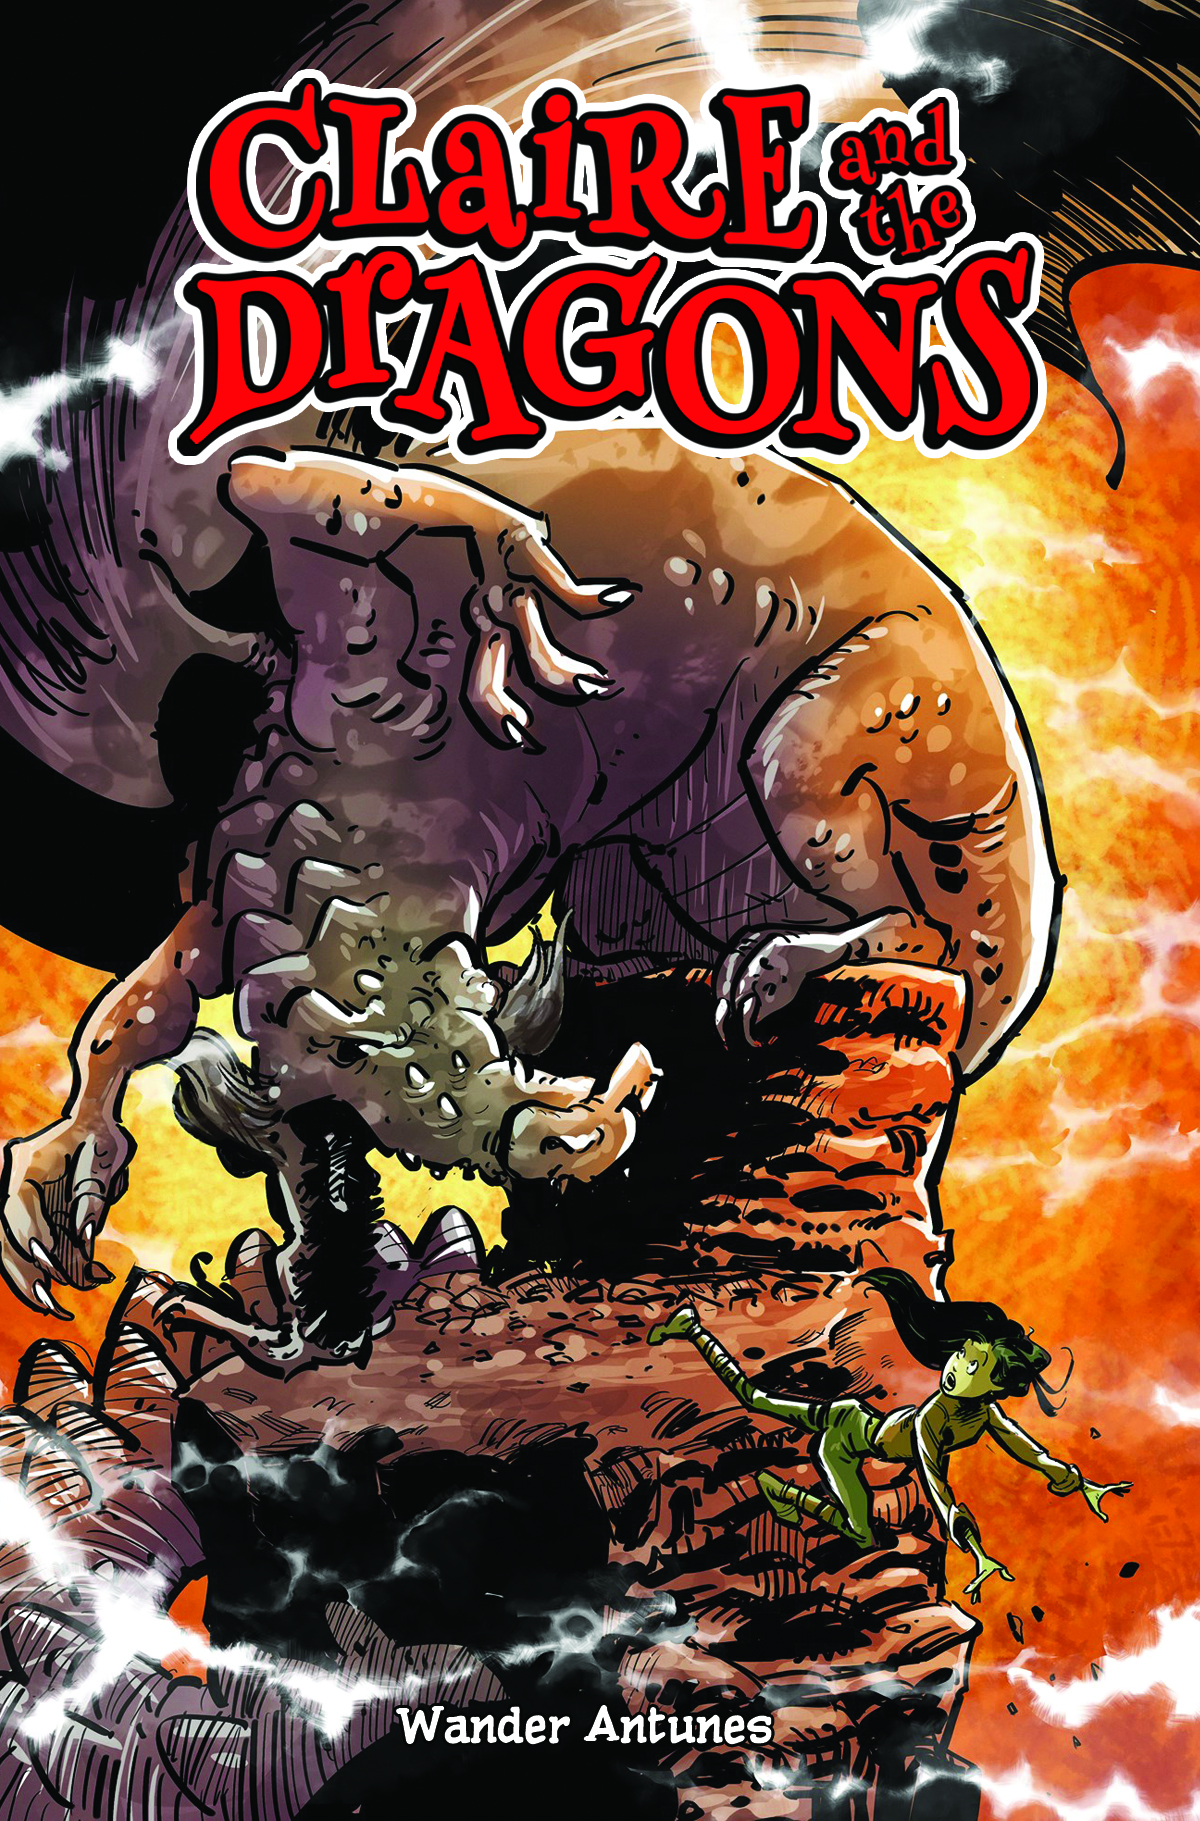 Claire and the Dragon Graphic Novel